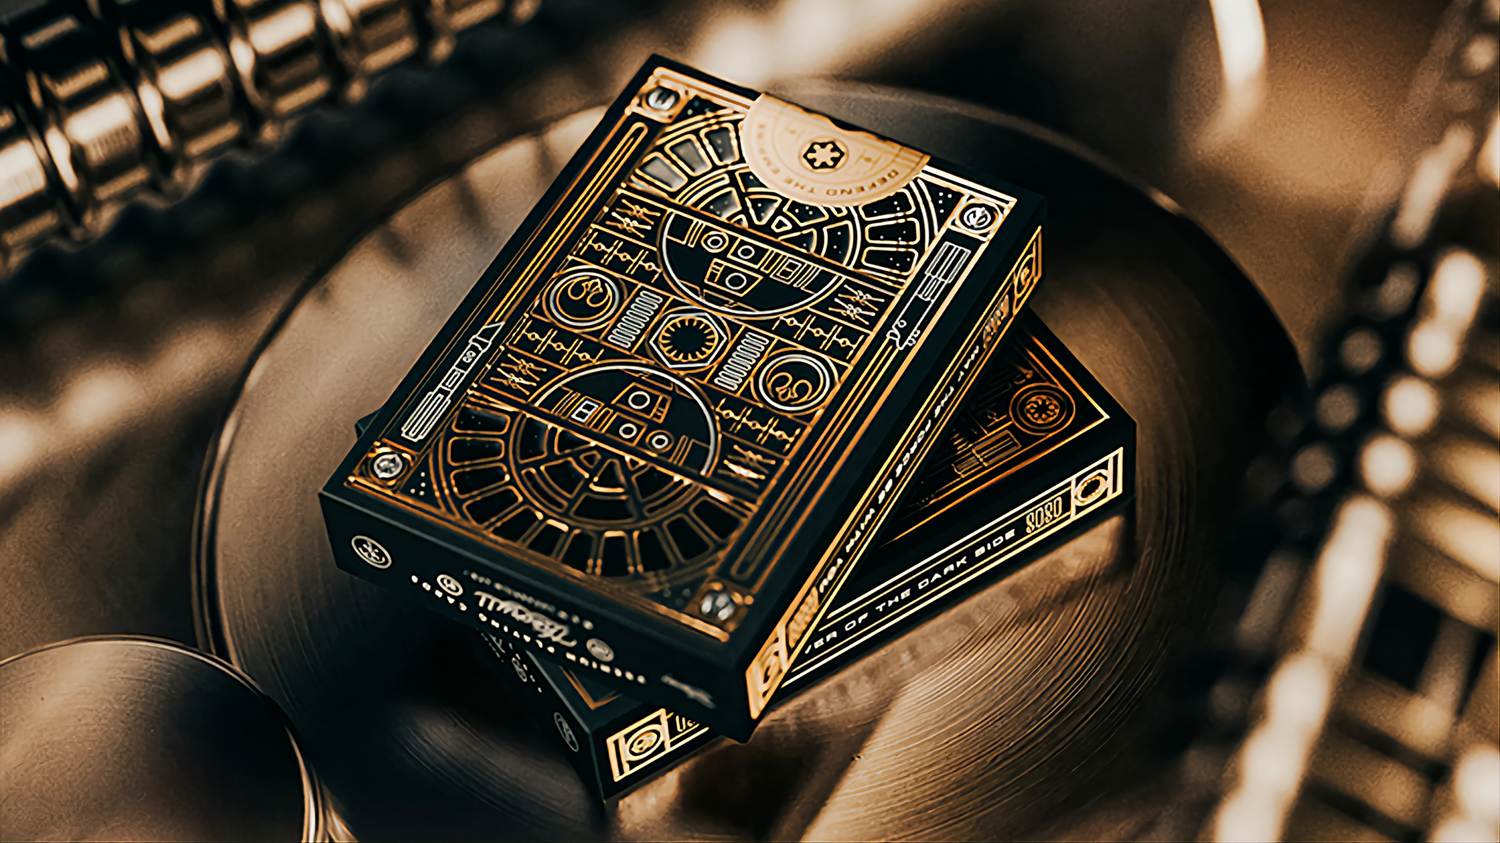 Star War Gold Edition by theory11 : Playing cards, Poker, Magic, Cardistry, Singapore